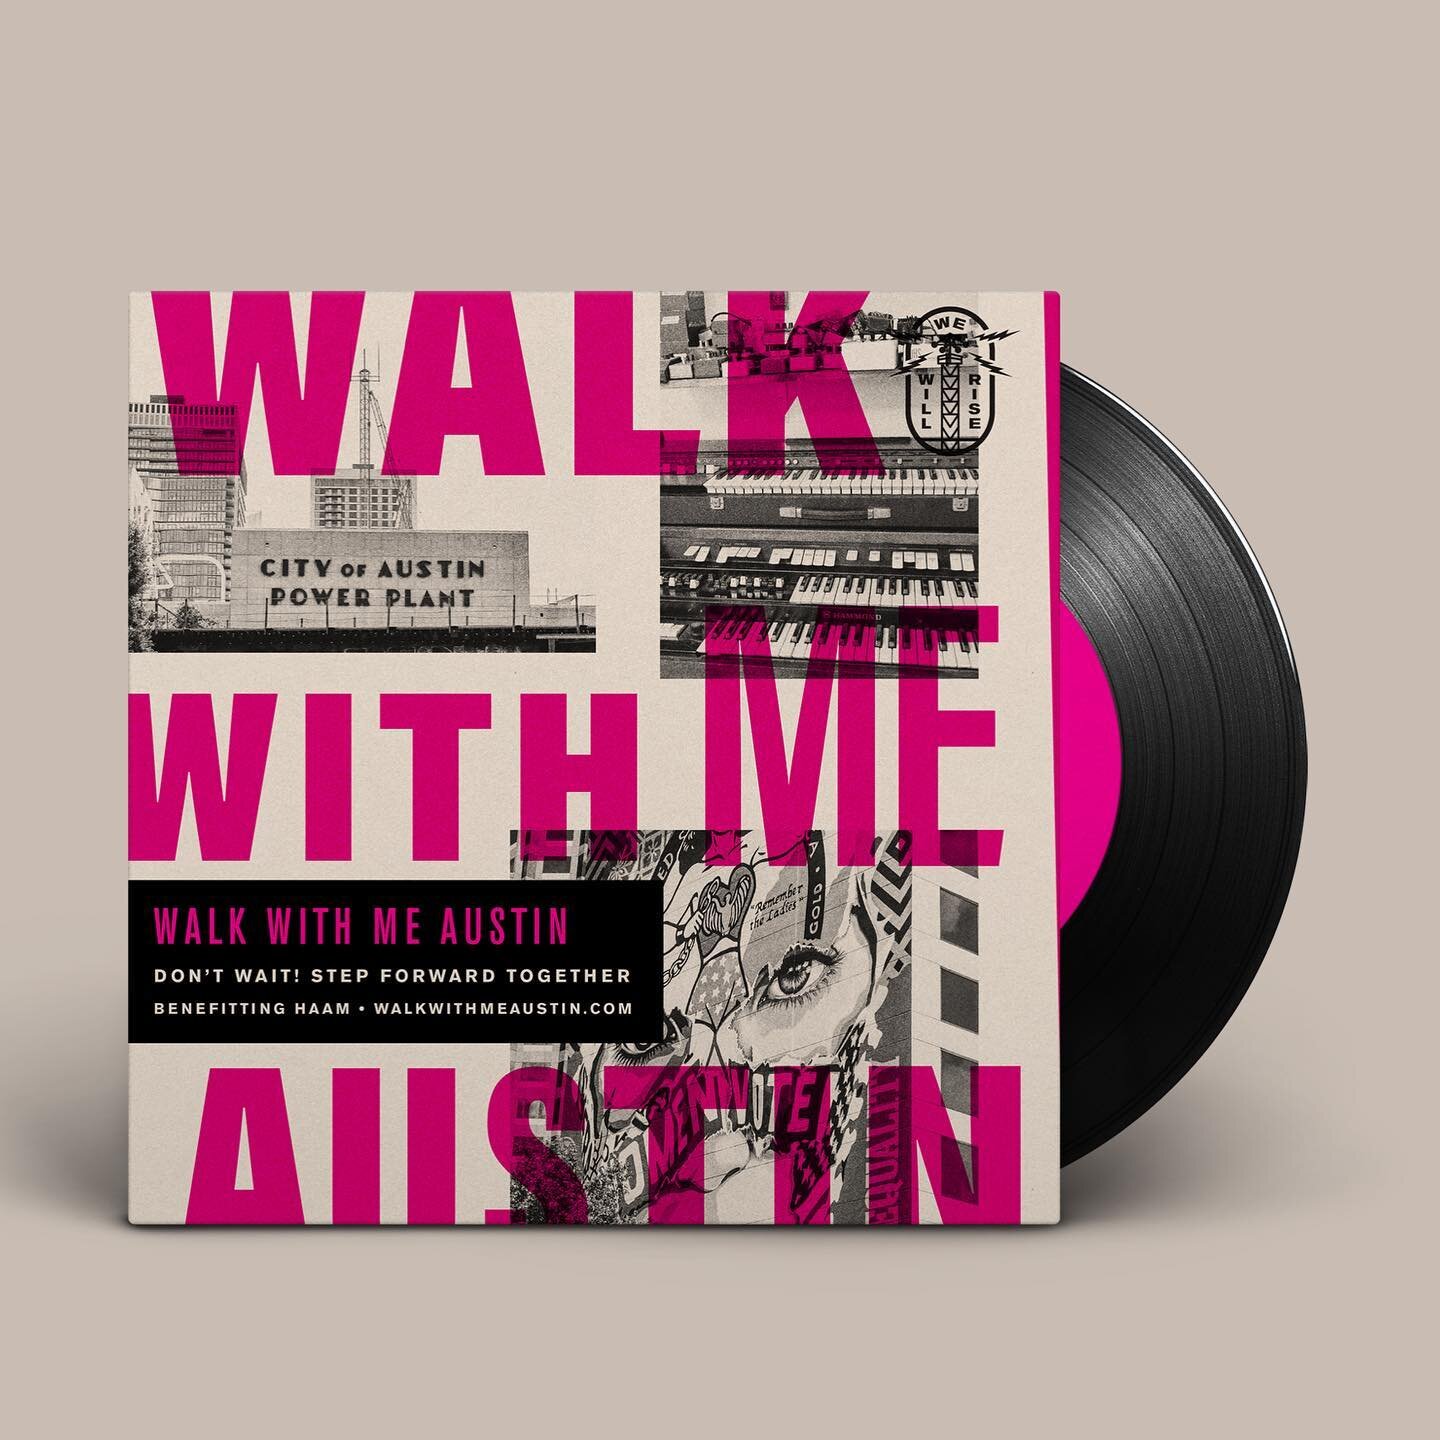 Introducing &ldquo;Walk With Me&rdquo;, a city anthem featuring over 40 local musicians showcasing the diversity, talent, and musical genres of Austin, Texas. We hope this song serves as a symbol of hope that inspires our community to work towards a 